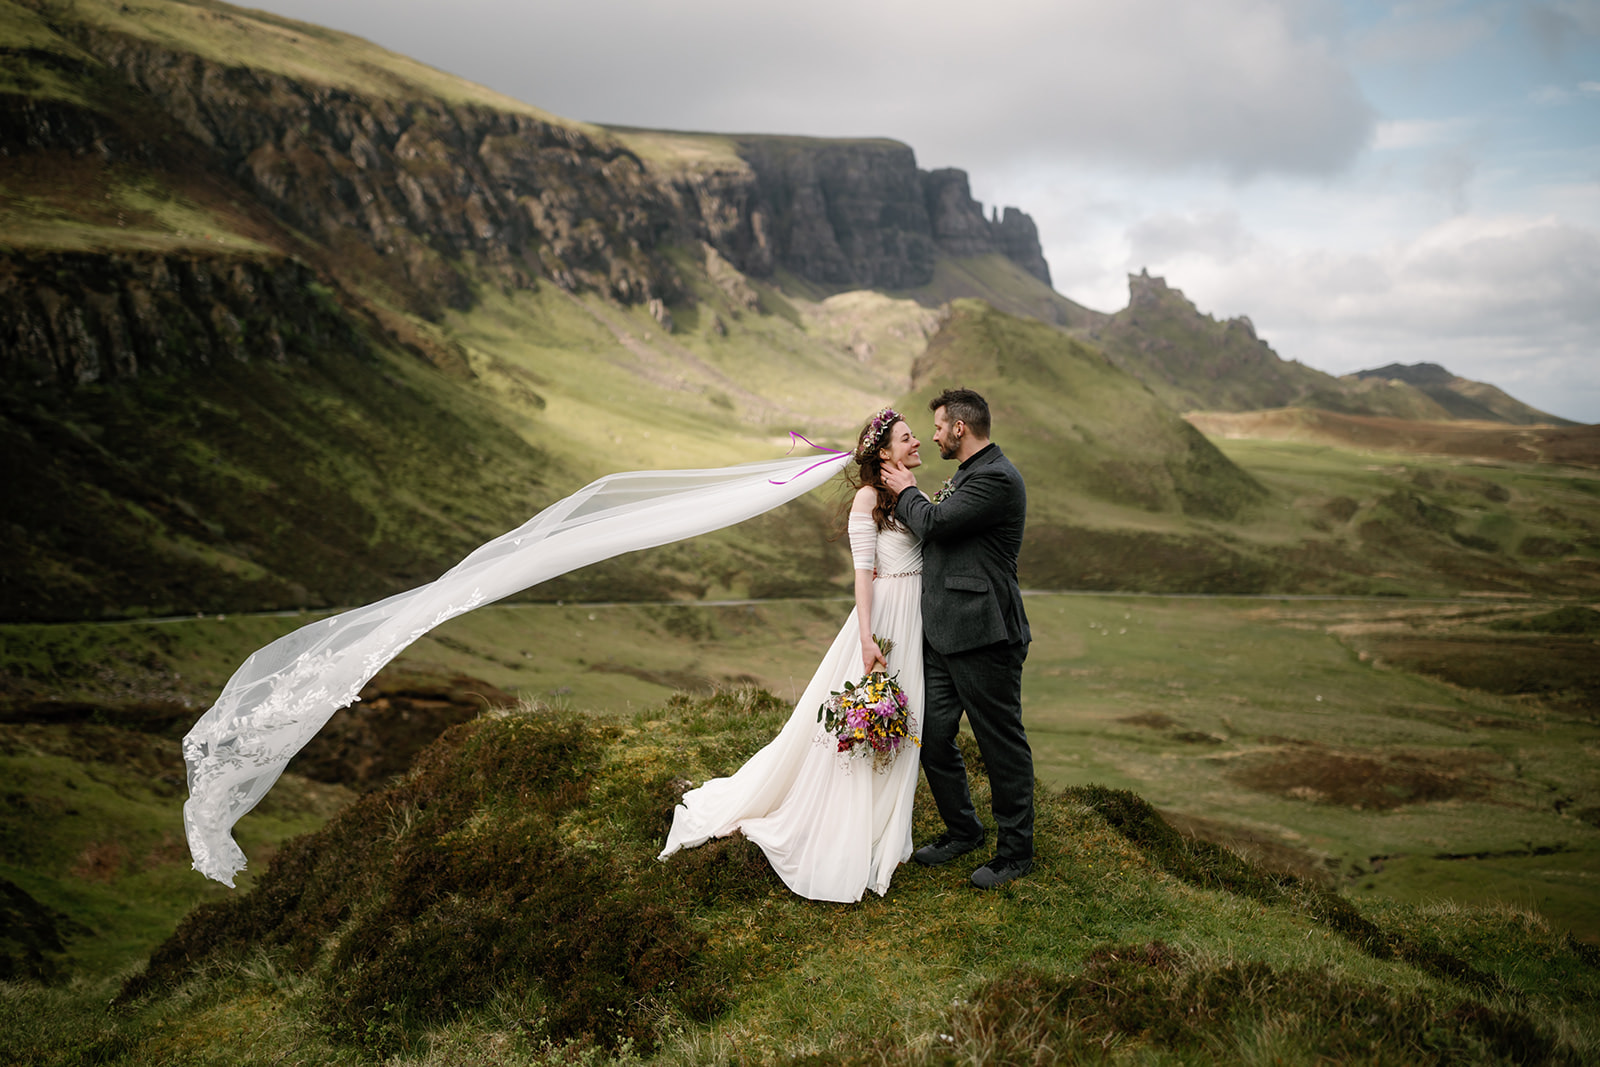 Becca, adorned in a stunning gown, gazes at Nick with love and anticipation against the backdrop of the Isle of Skye's e